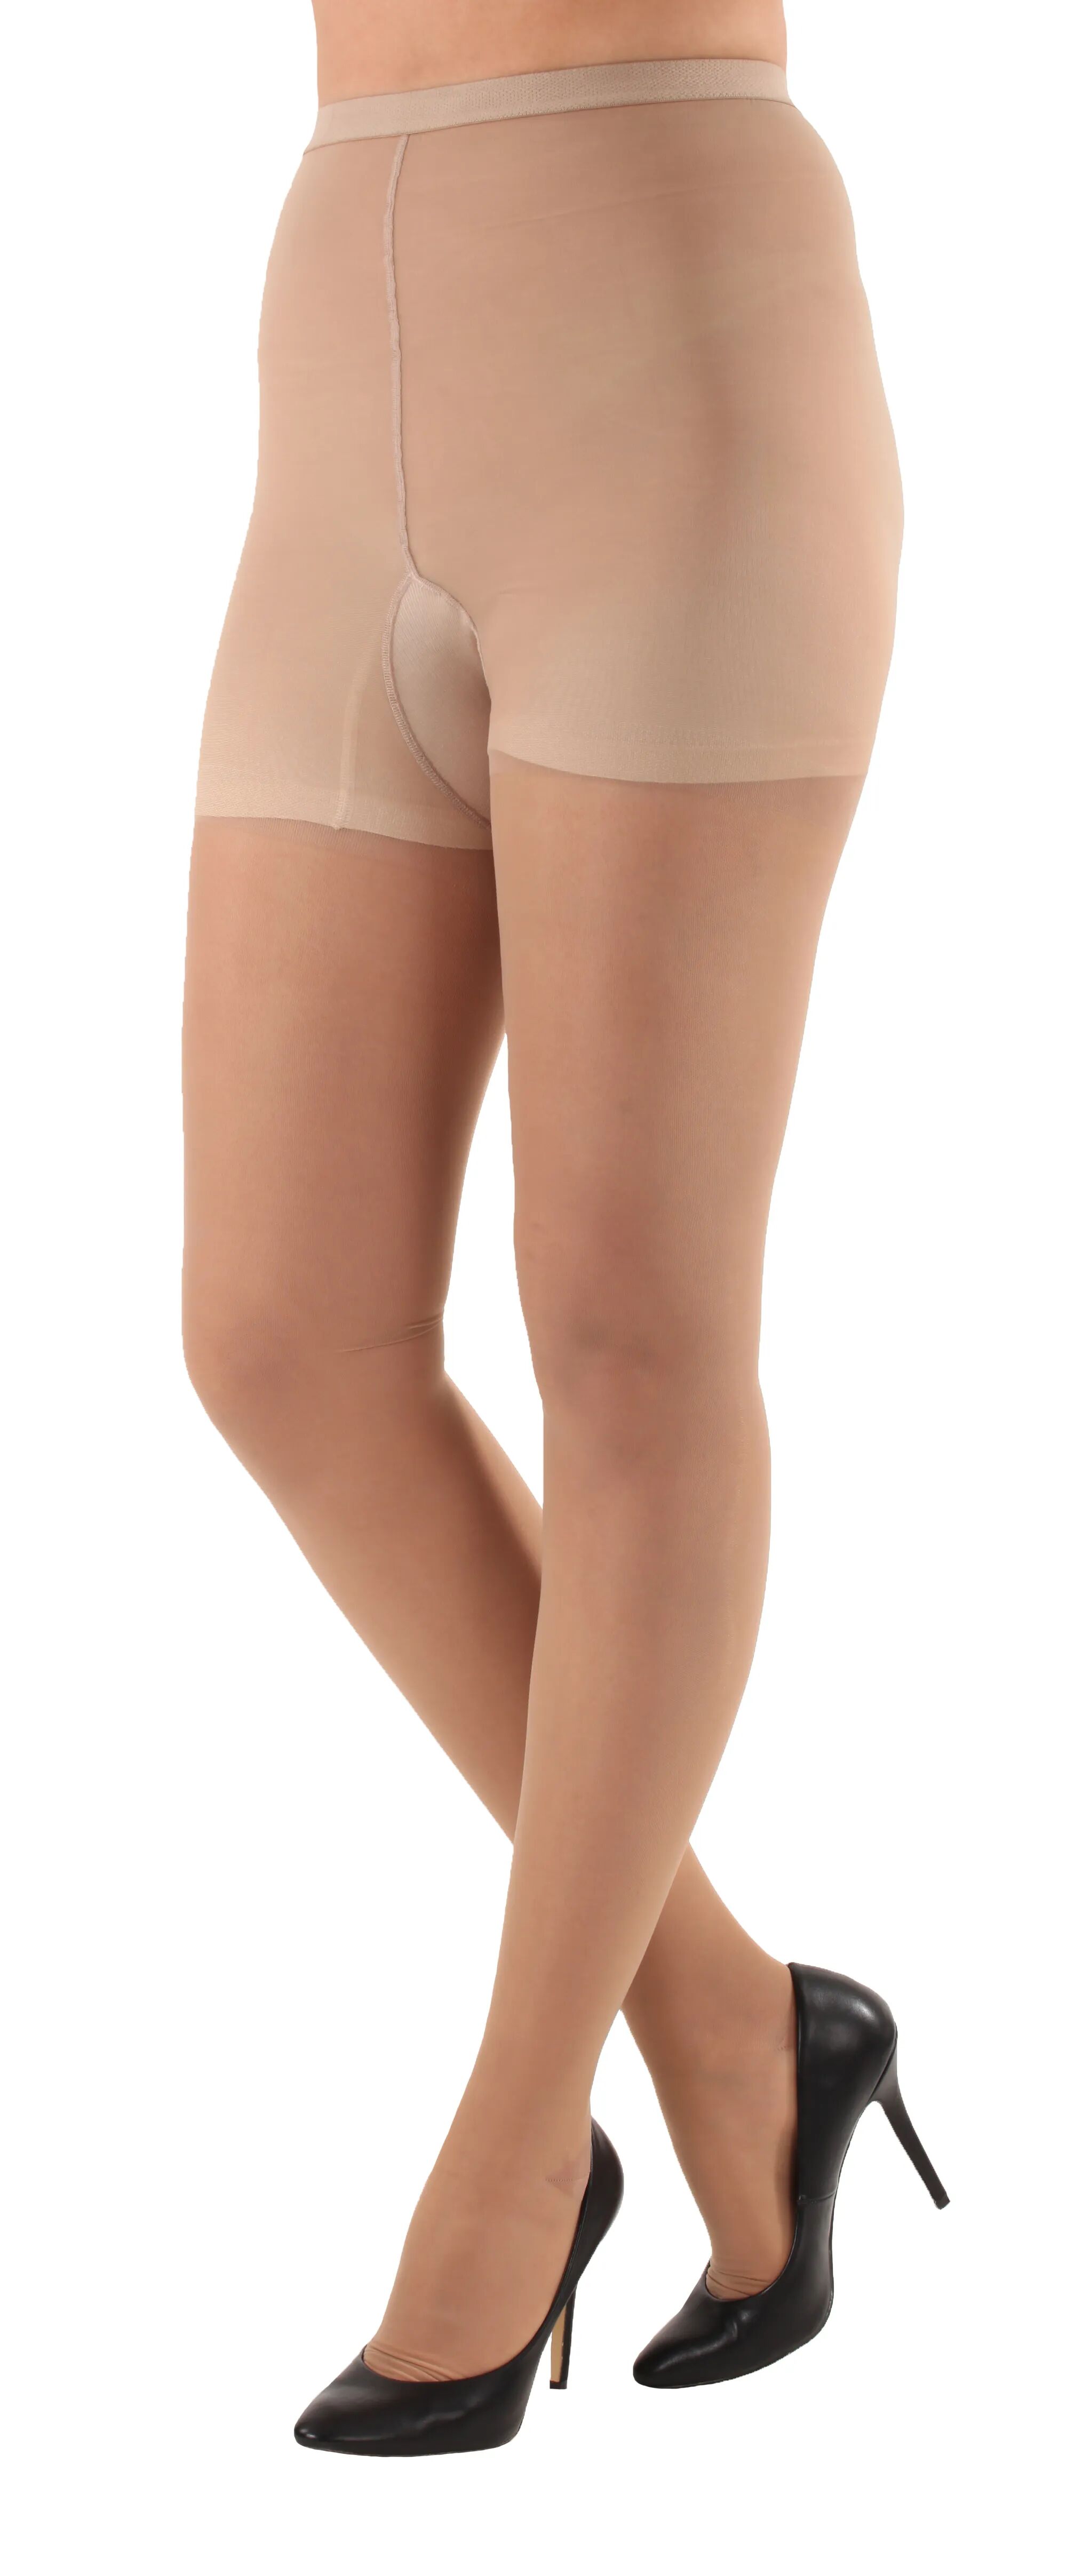 Absolute Support 15-20mmHg Medium Support Light Beige Queen Plus Women's Sheer Compression Pantyhose - A103LB6